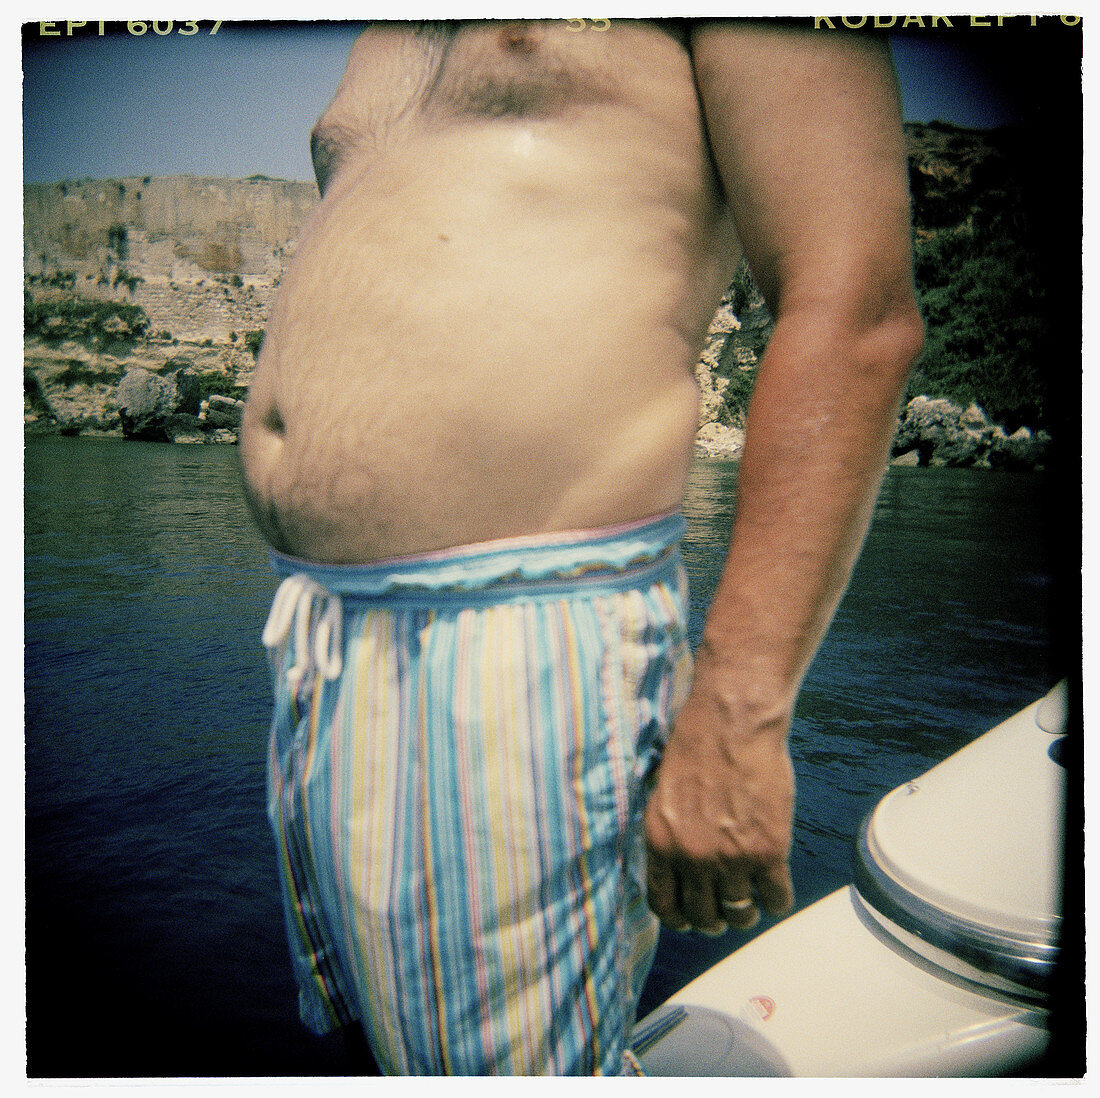 Fat stomach of a young man